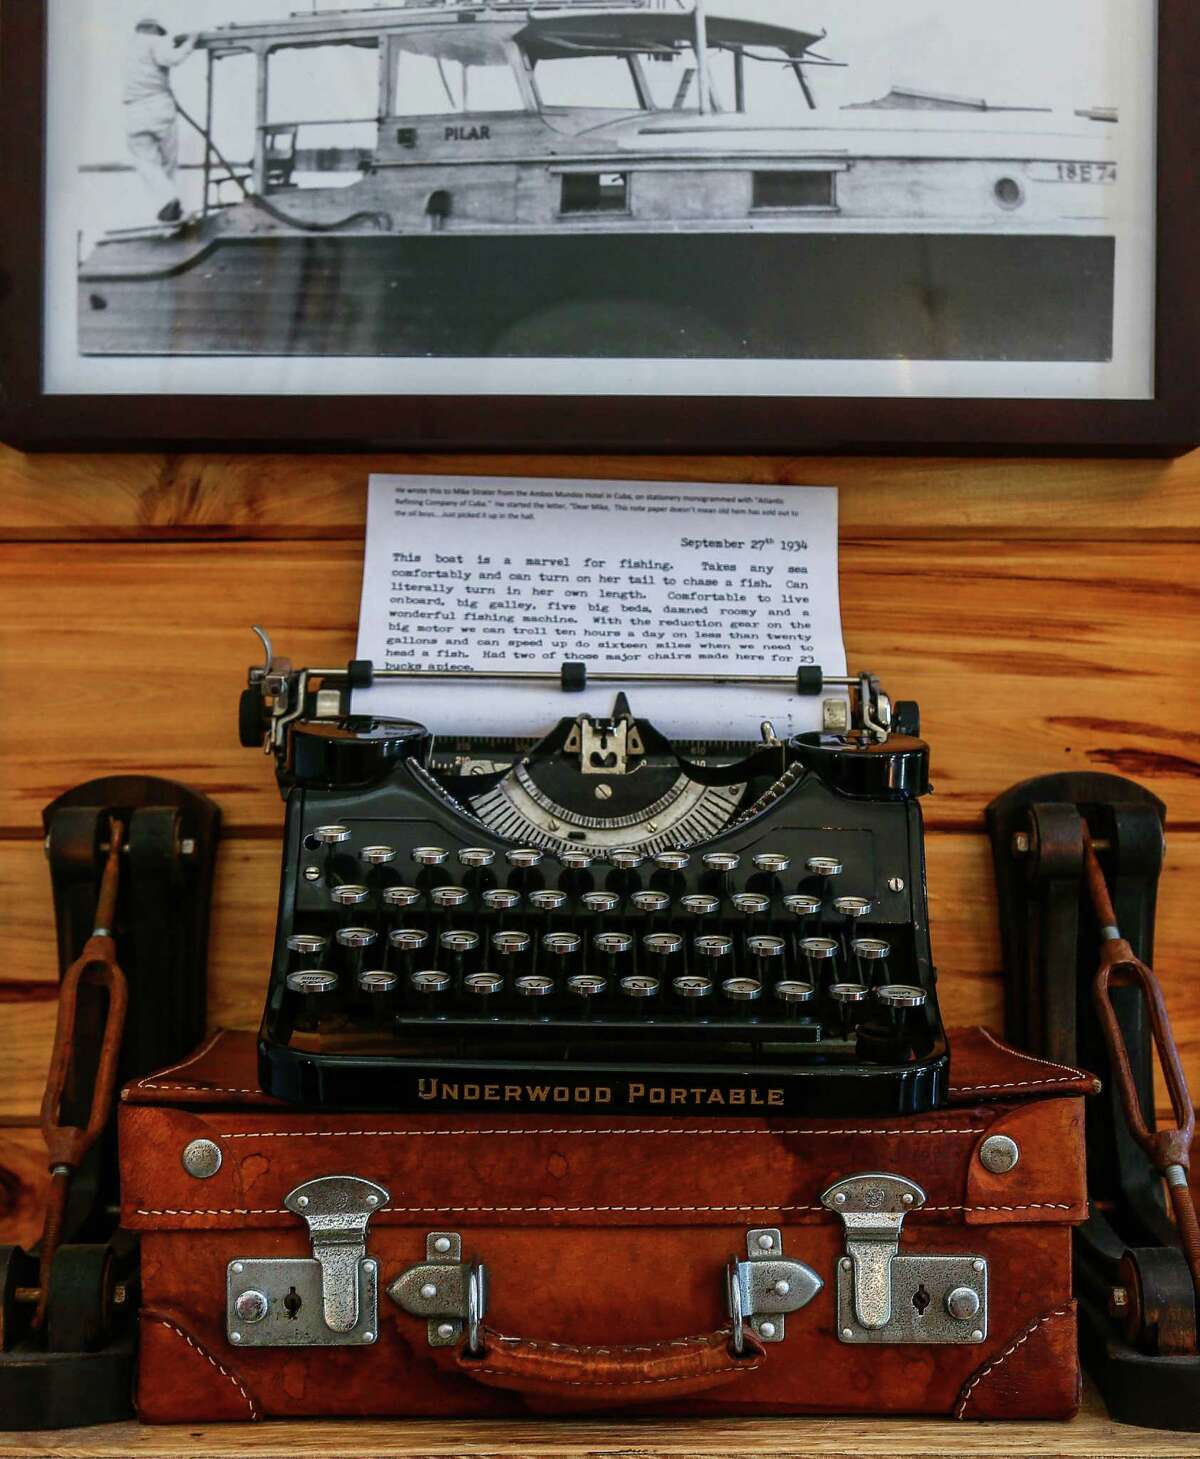 A tour of Ernest HemingwayÂ?’s home is de rigeur when you visit Key West, even if itÂ?’s just to gaze upon the Underwood portable typewriter on which such classics as "The Old Man and the Sea" and "For Whom the Bell Tolls" were brought to life.